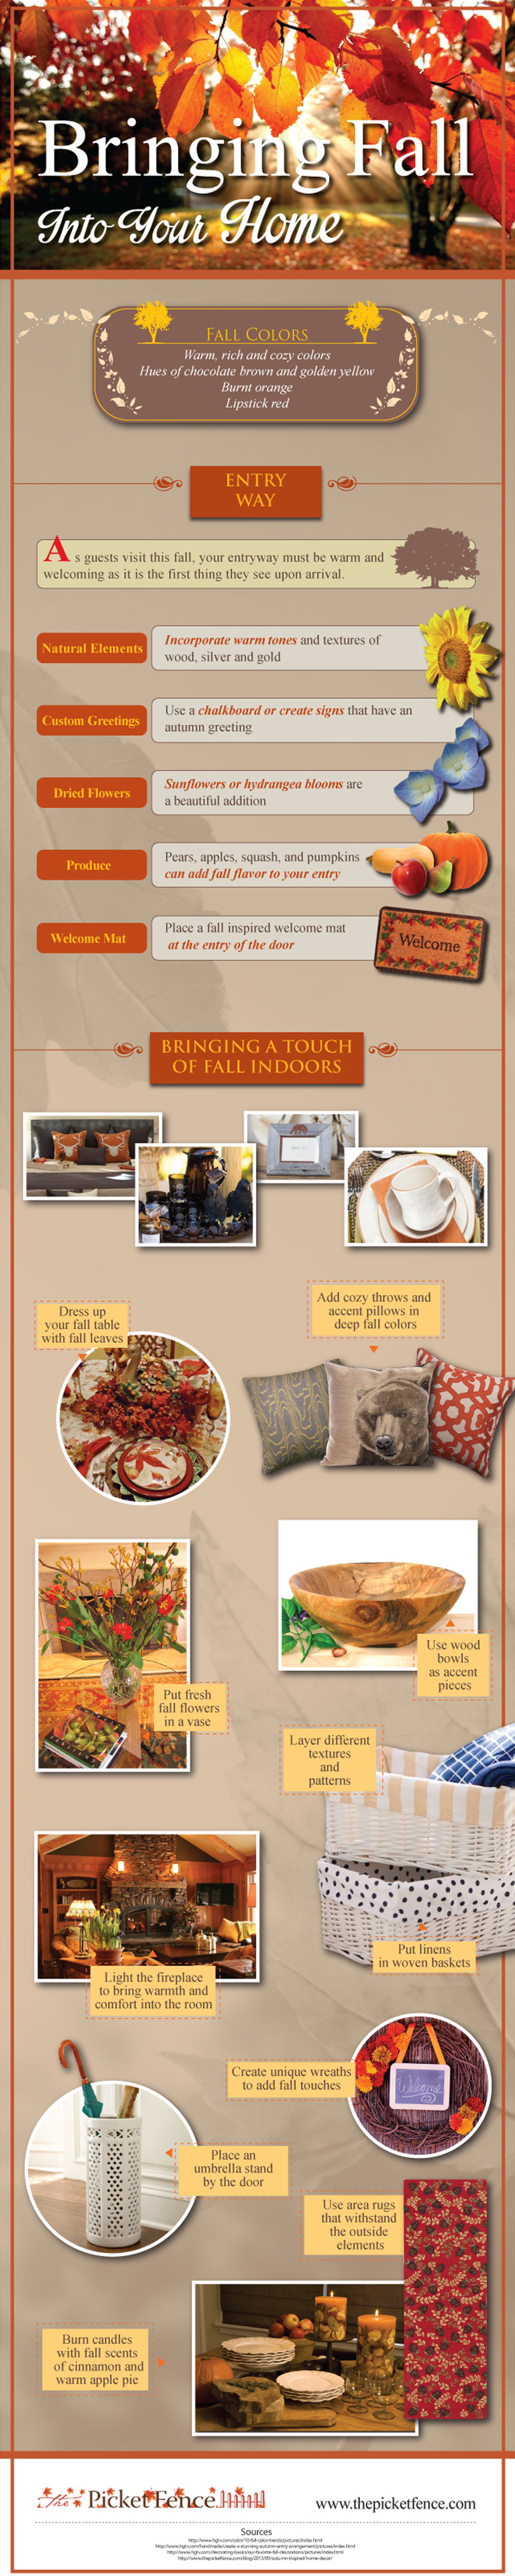 Bringing Fall Into Your Home